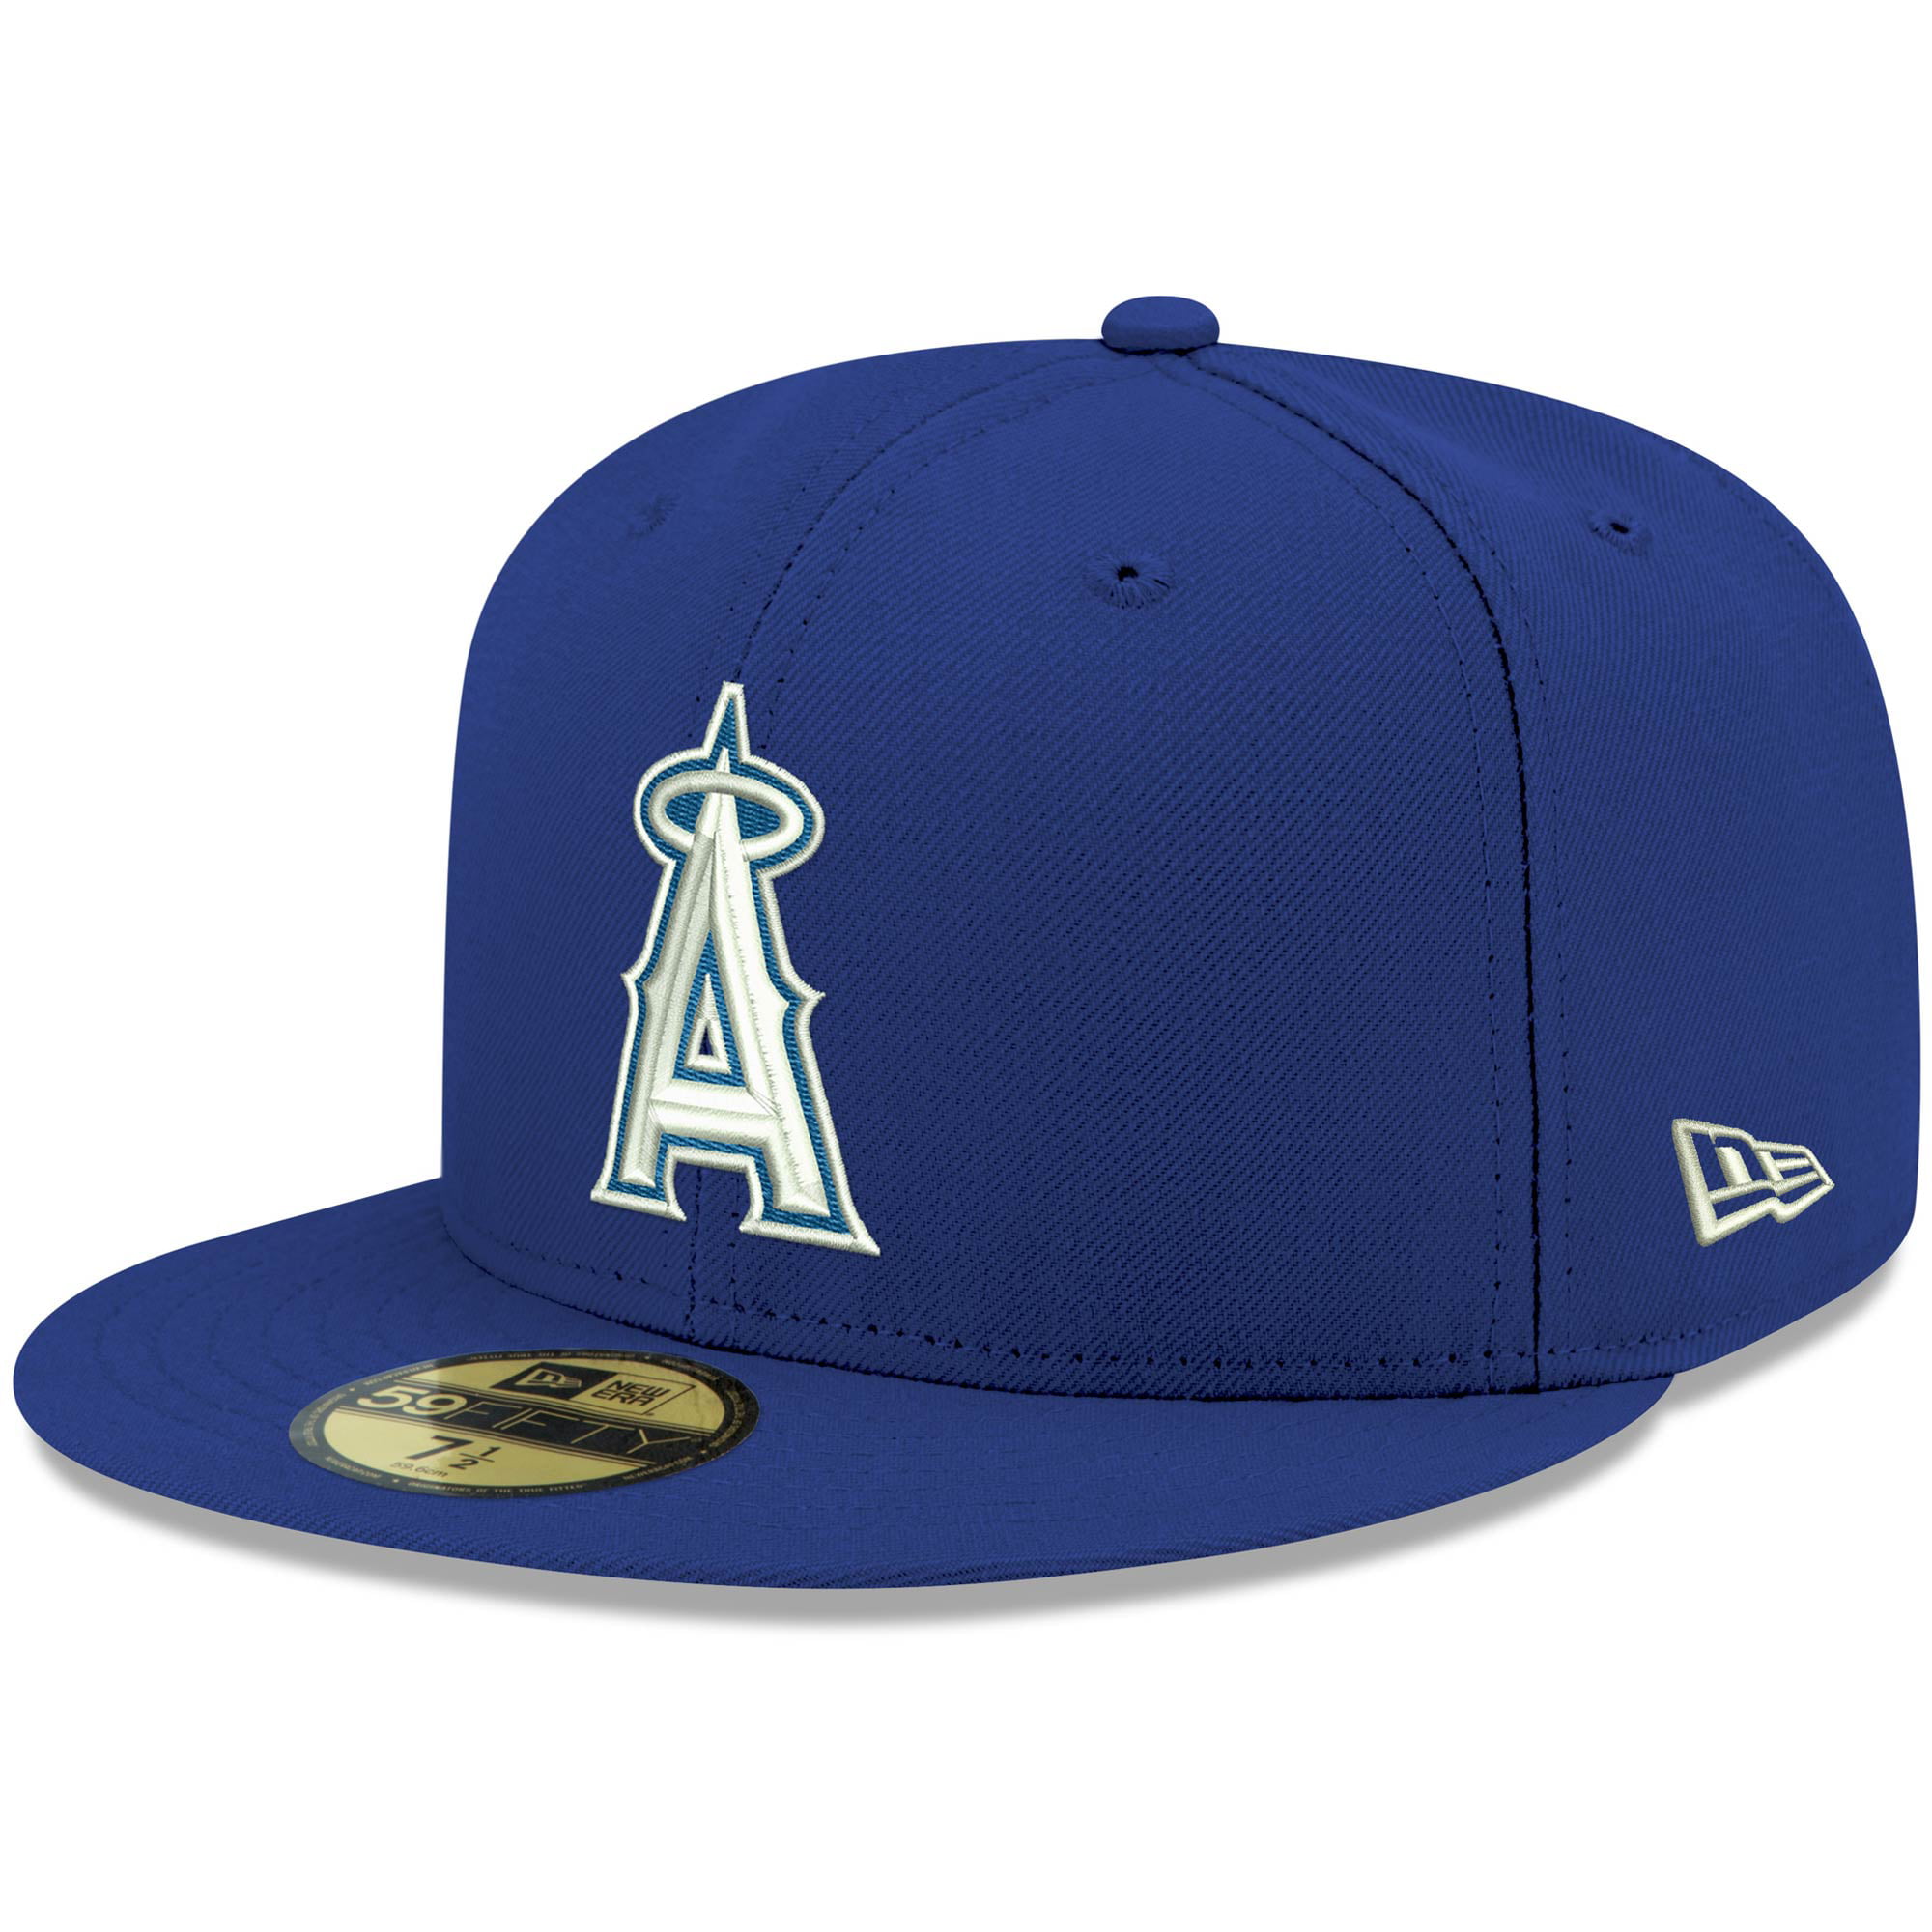 Men's New Era Royal Los Angeles Angels Logo White 59FIFTY Fitted Hat